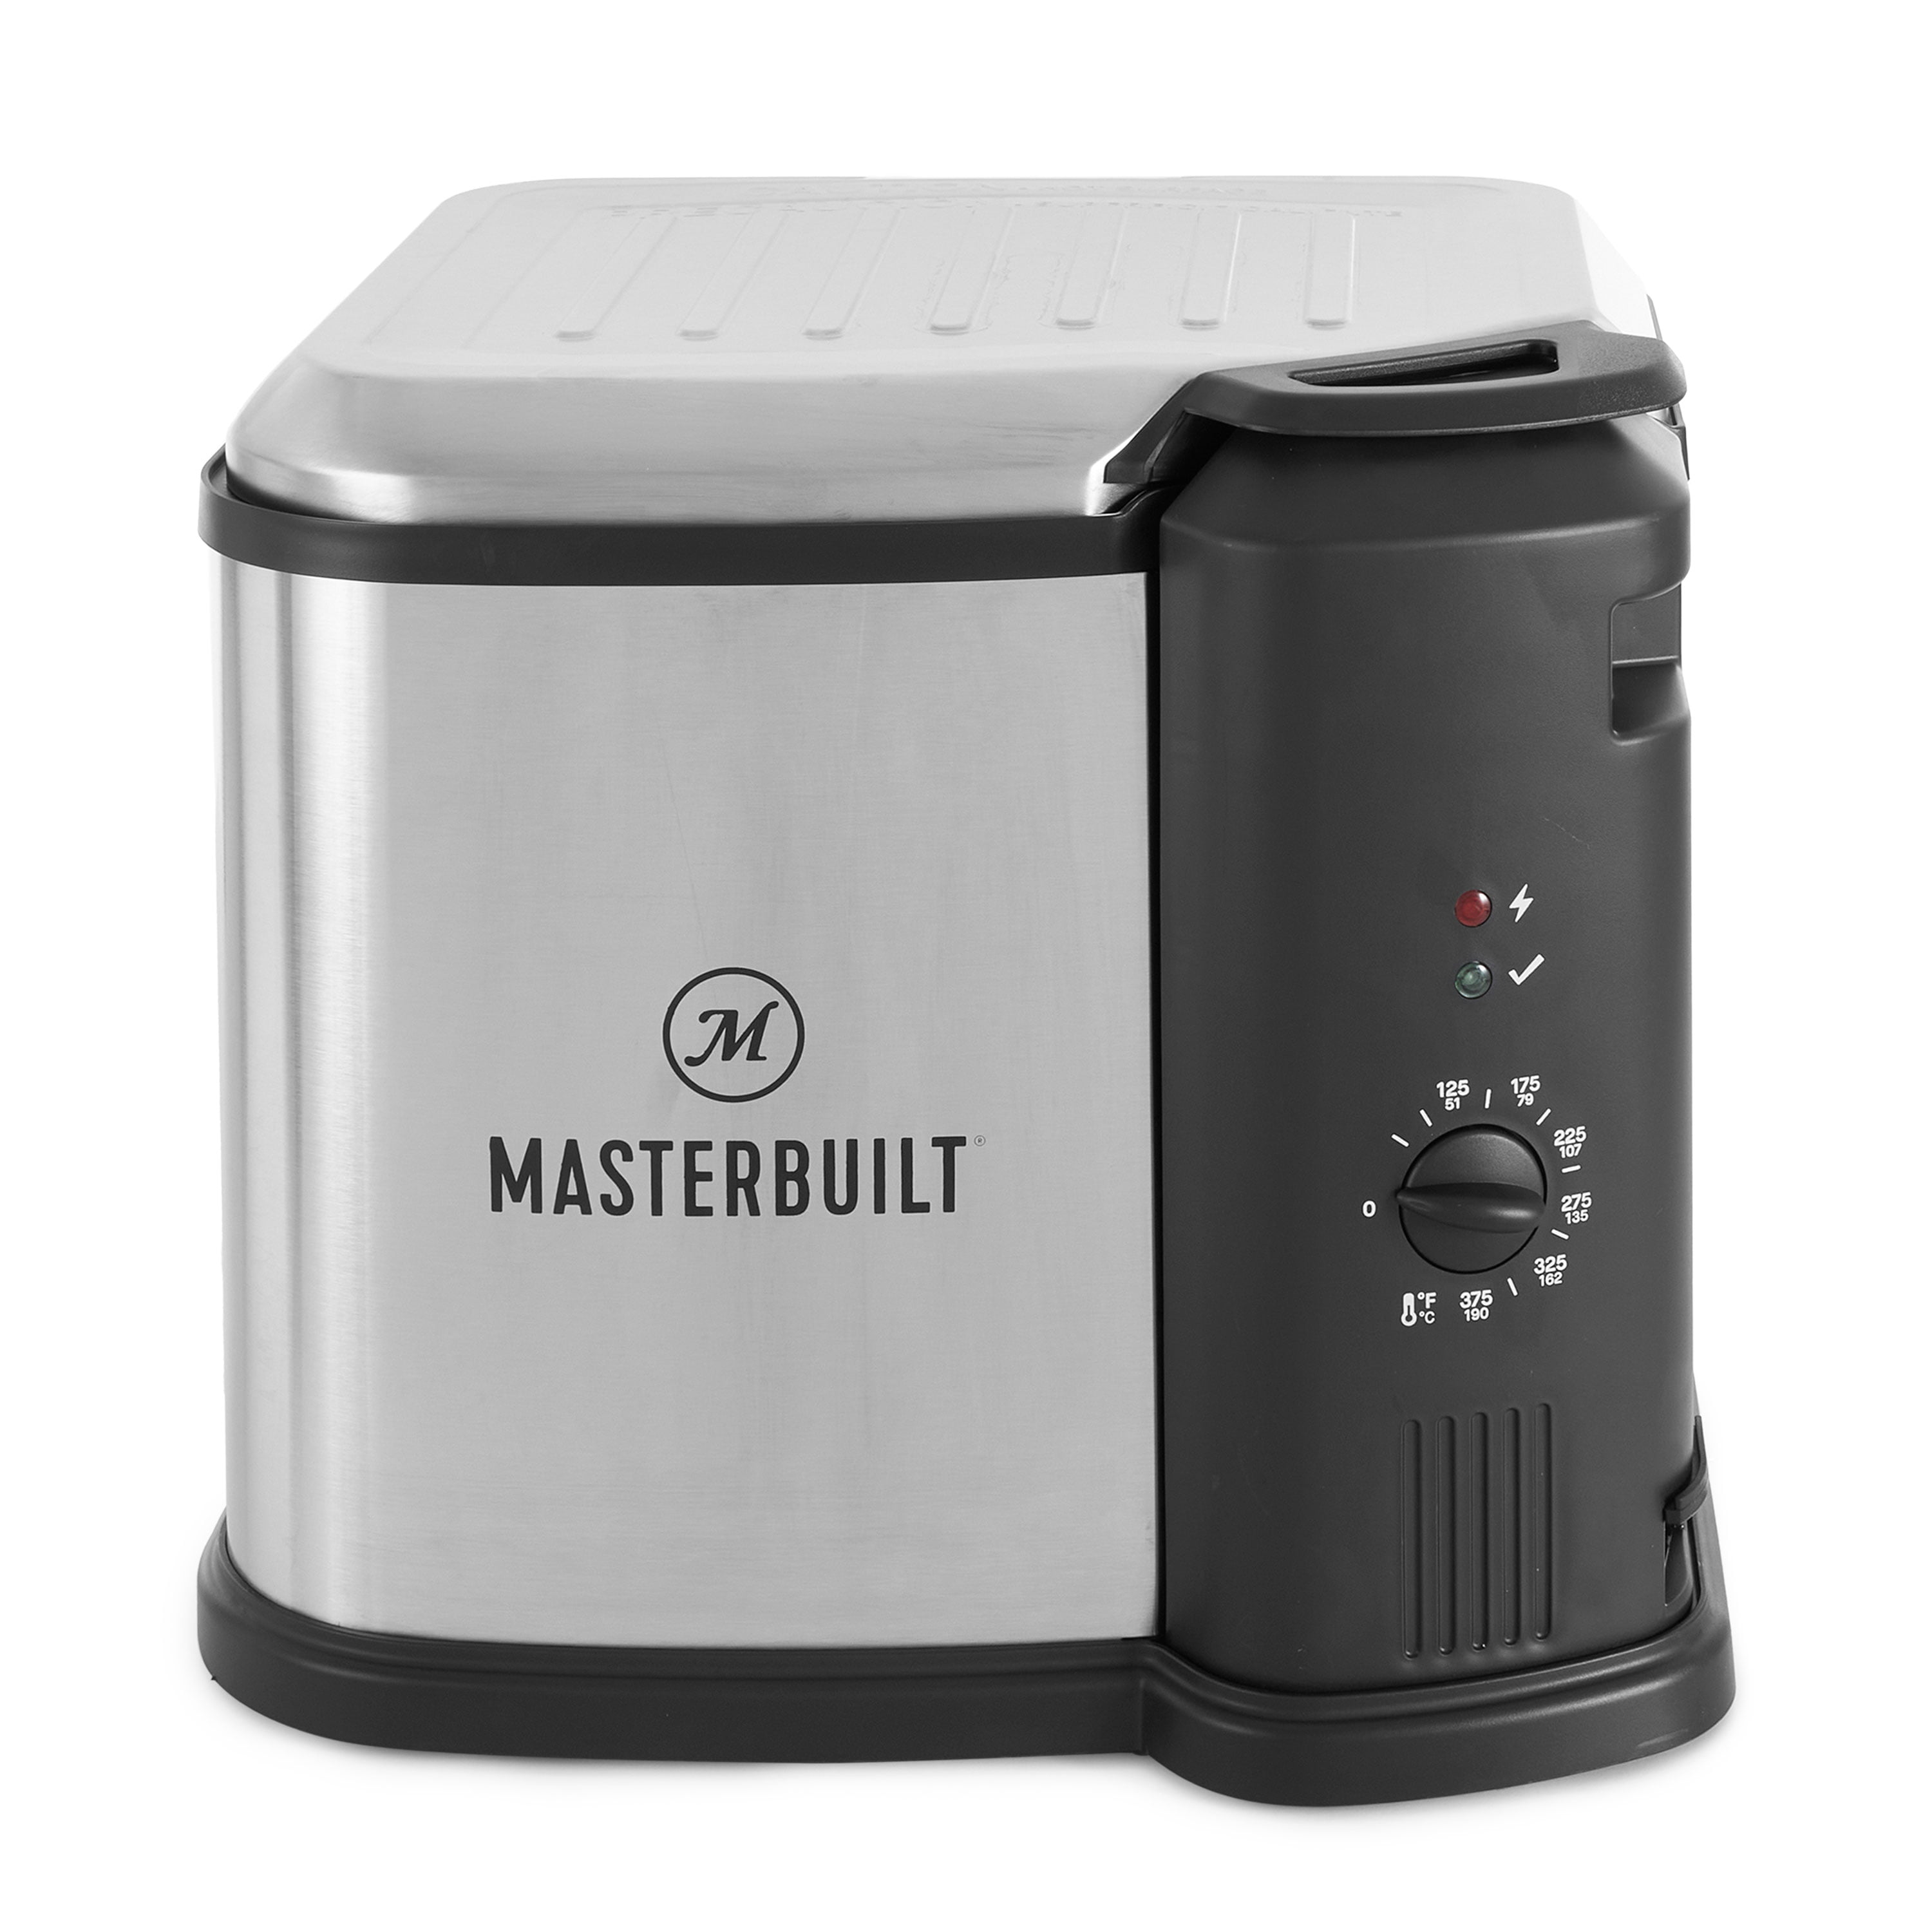 Masterbuilt Countertop 8L Electric Deep Fryer, Boiler, Steamer Cooker in Silver $59.99 + Free Shipping